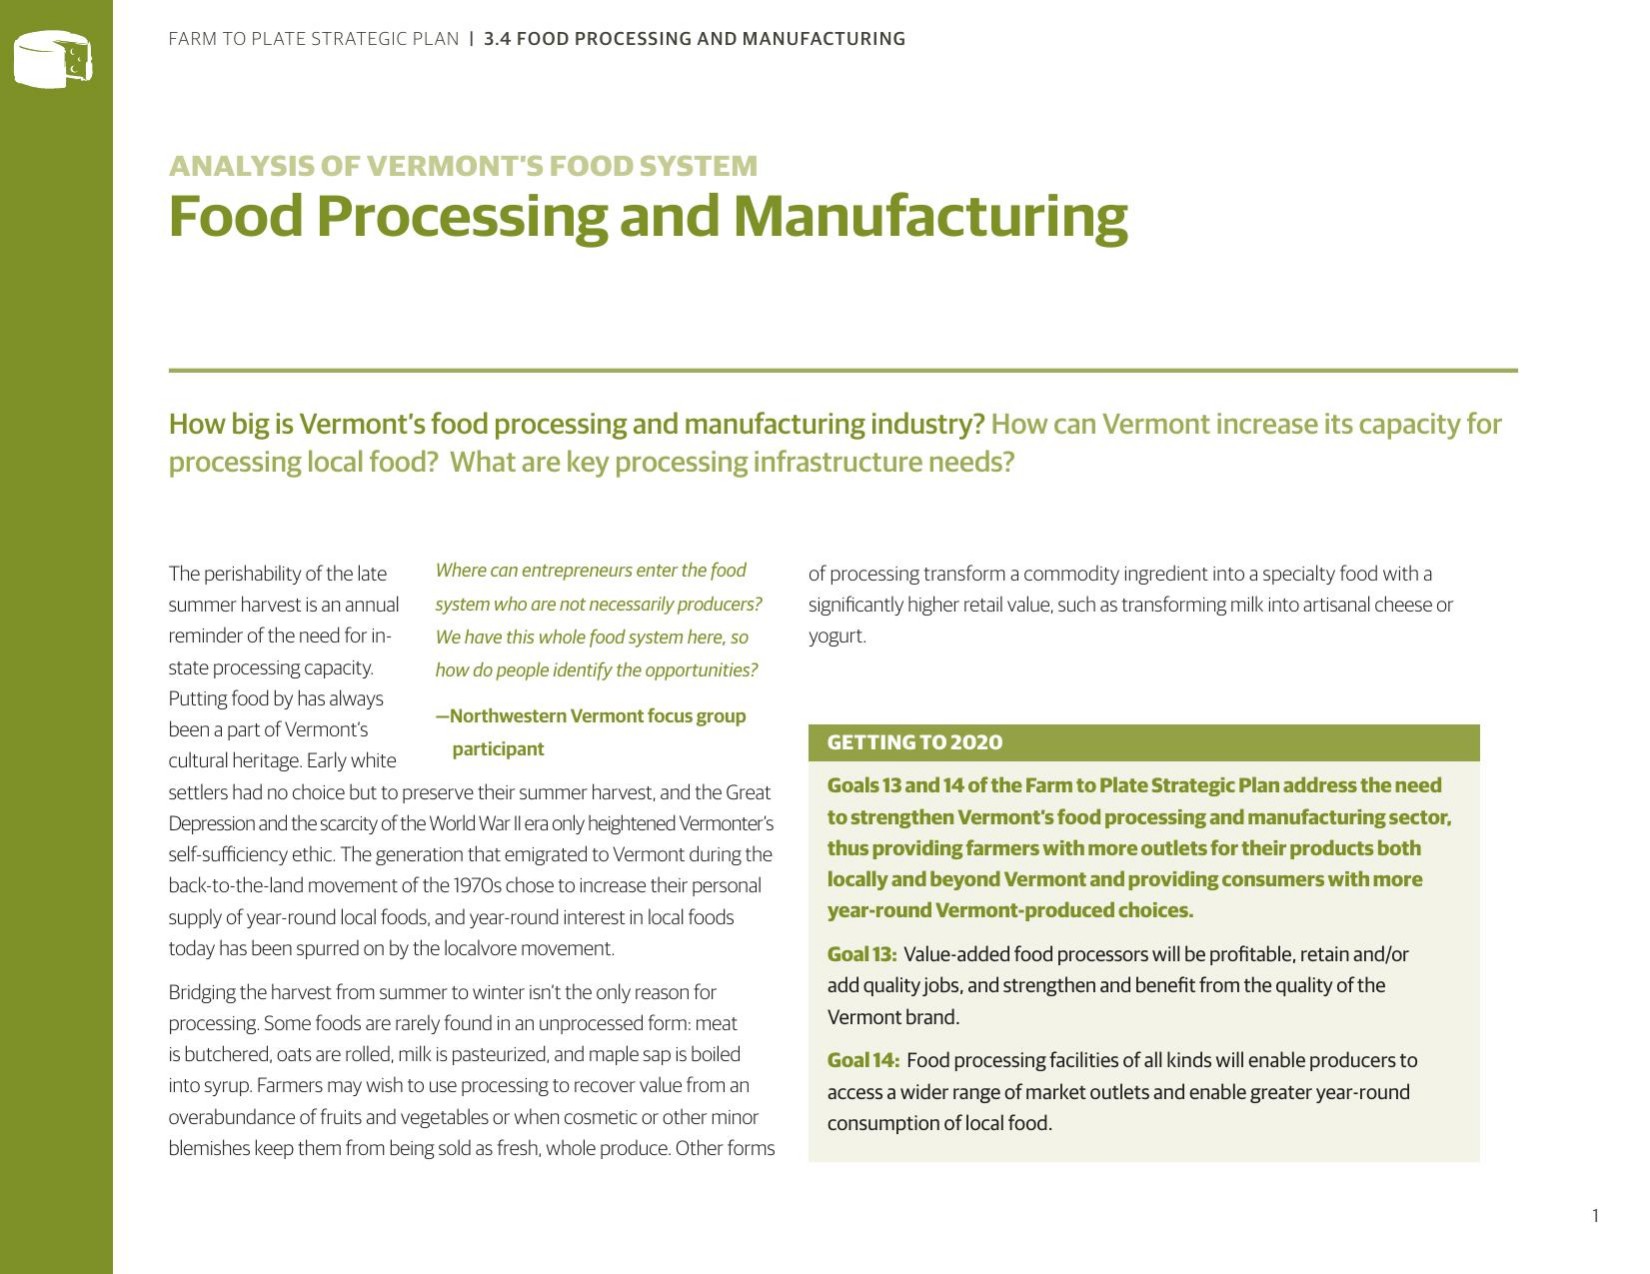 Food Processing and Manufacturing